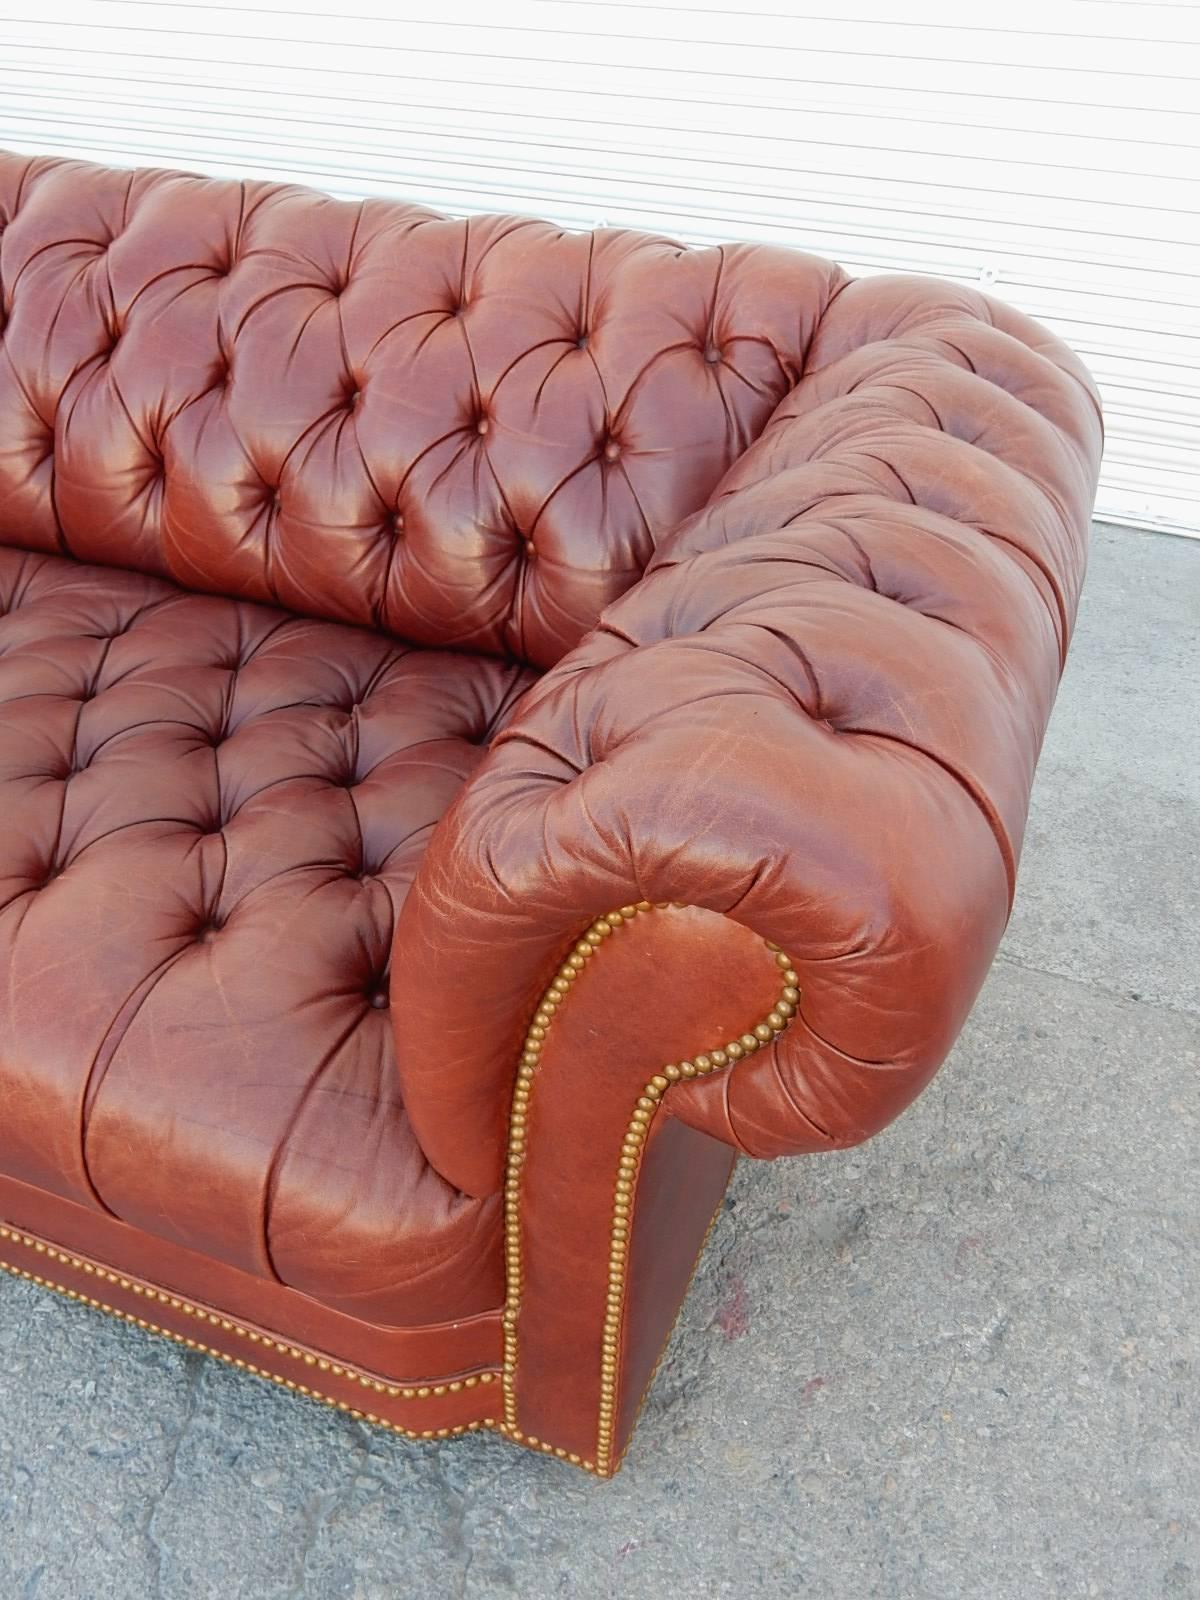 distressed leather chesterfield sofa